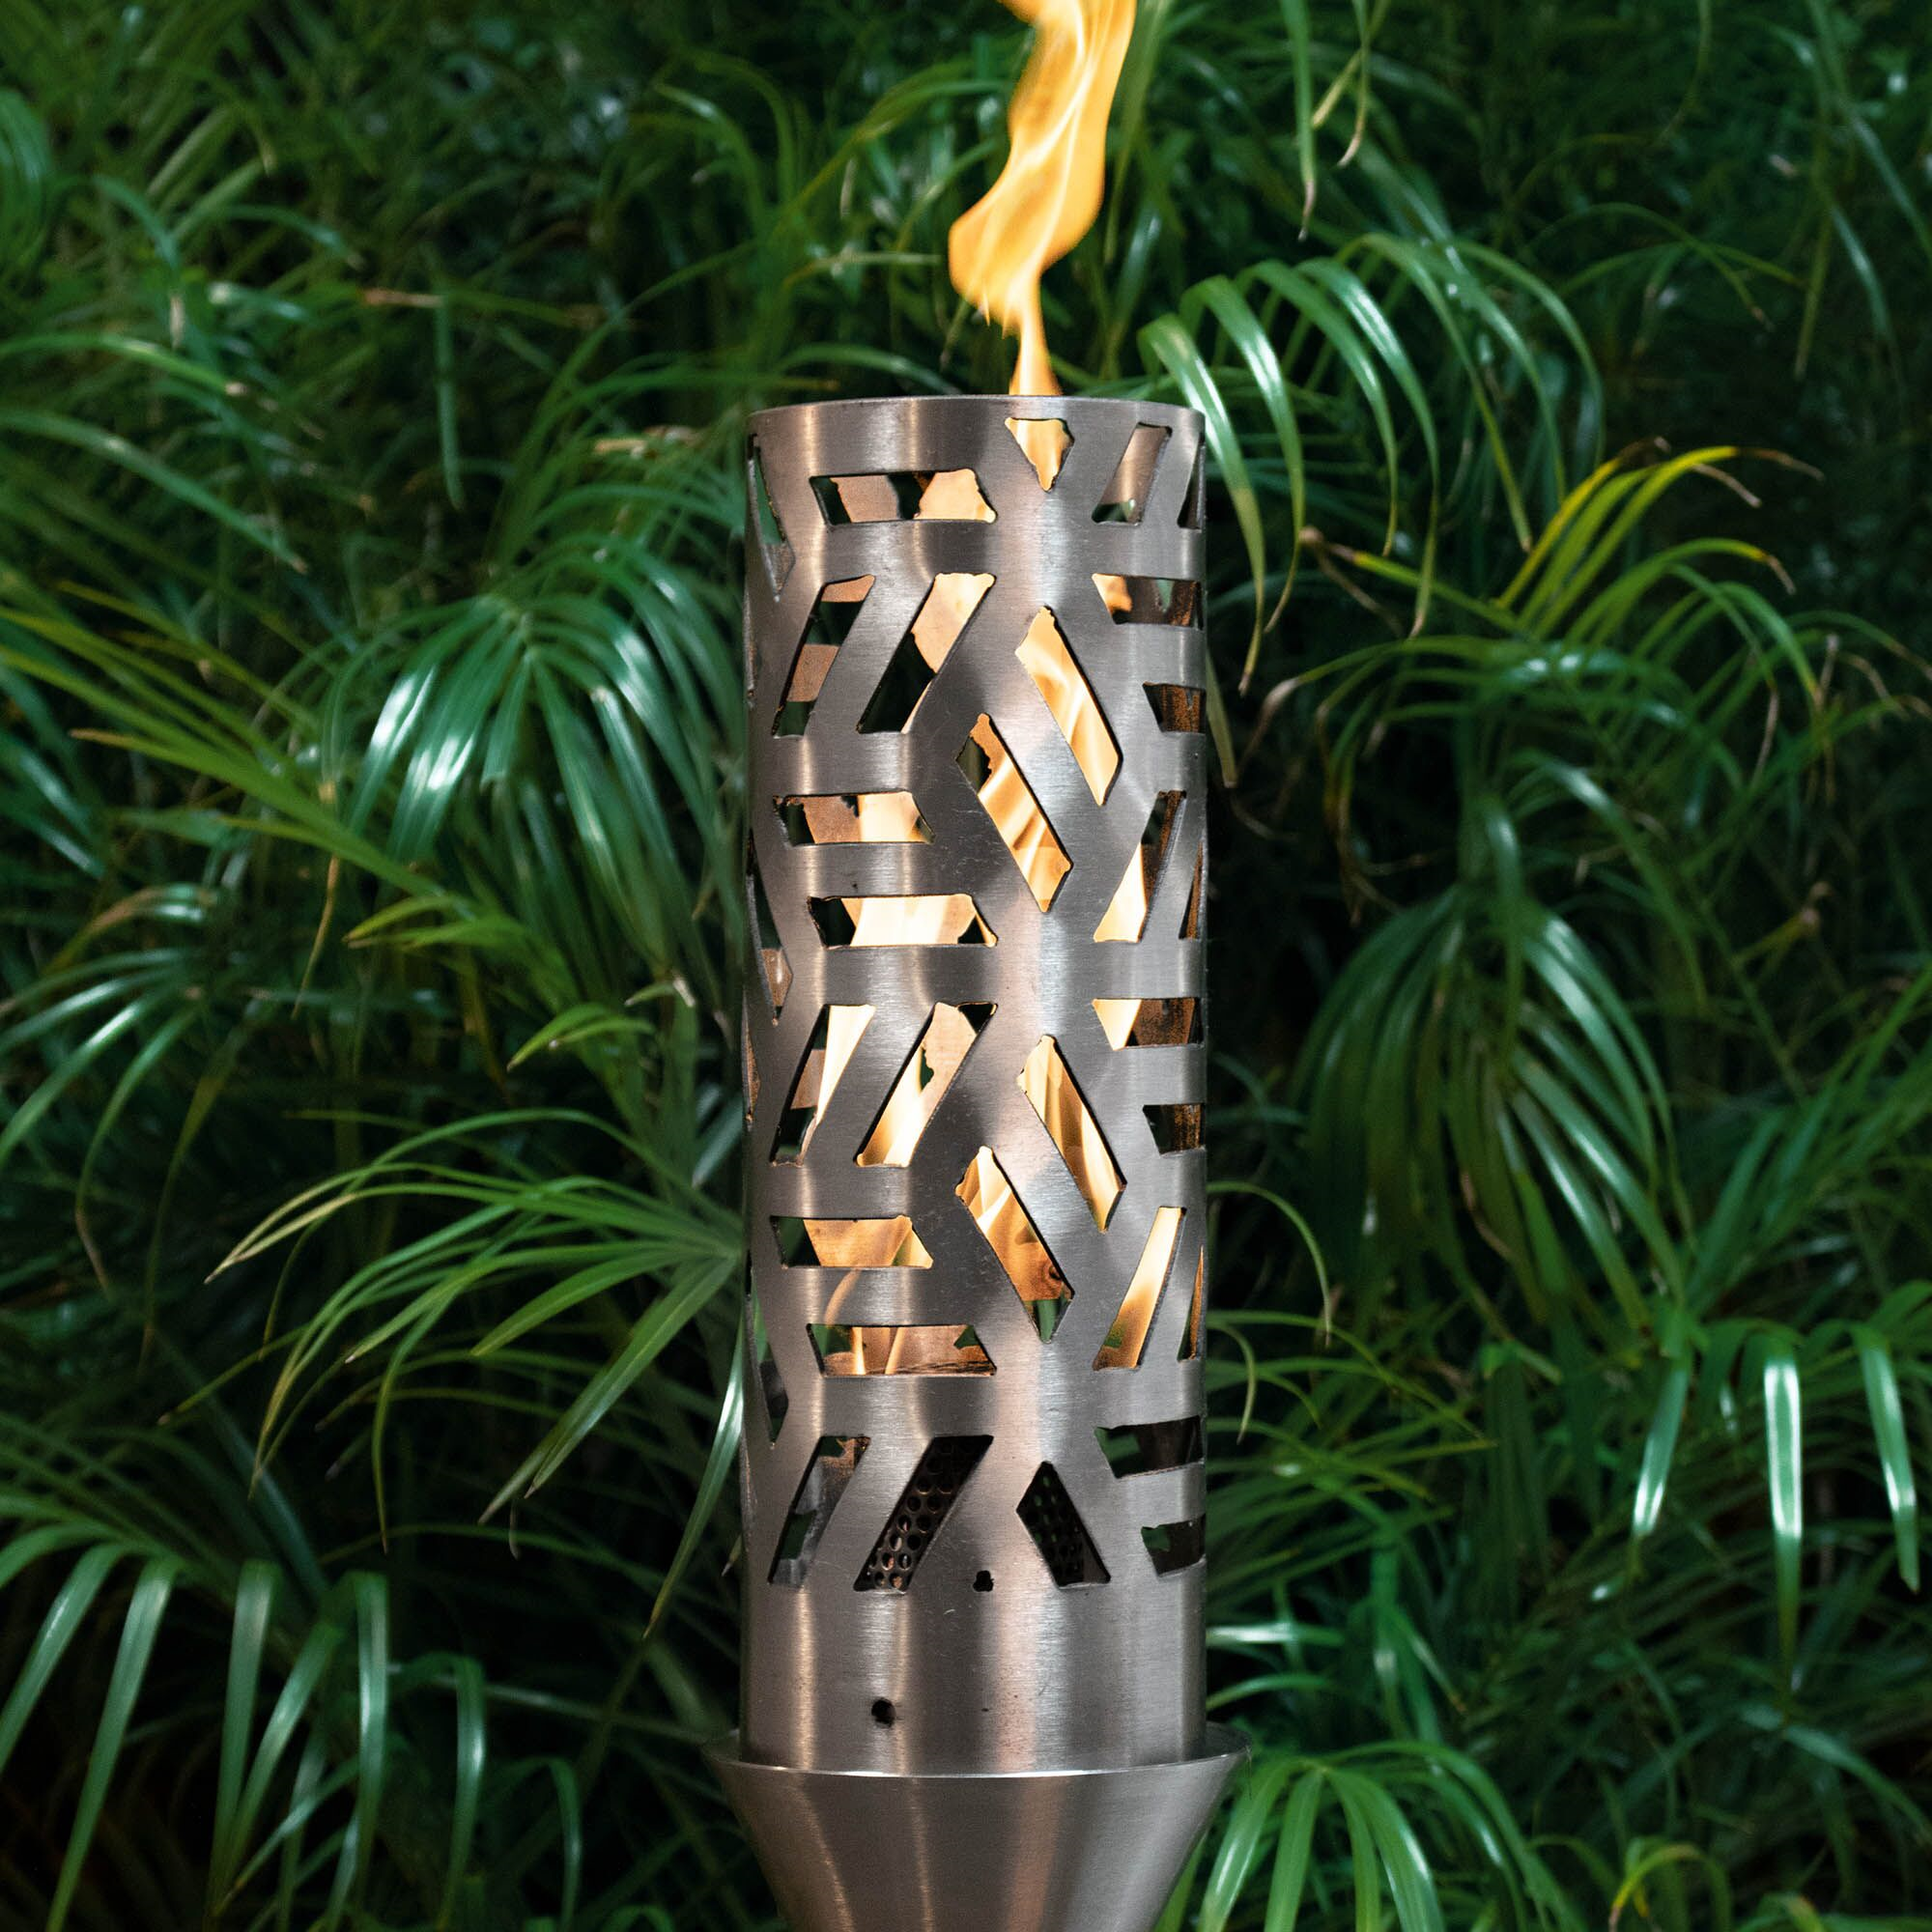 The Outdoor Plus Cubist Fire Torch - Stainless Steel